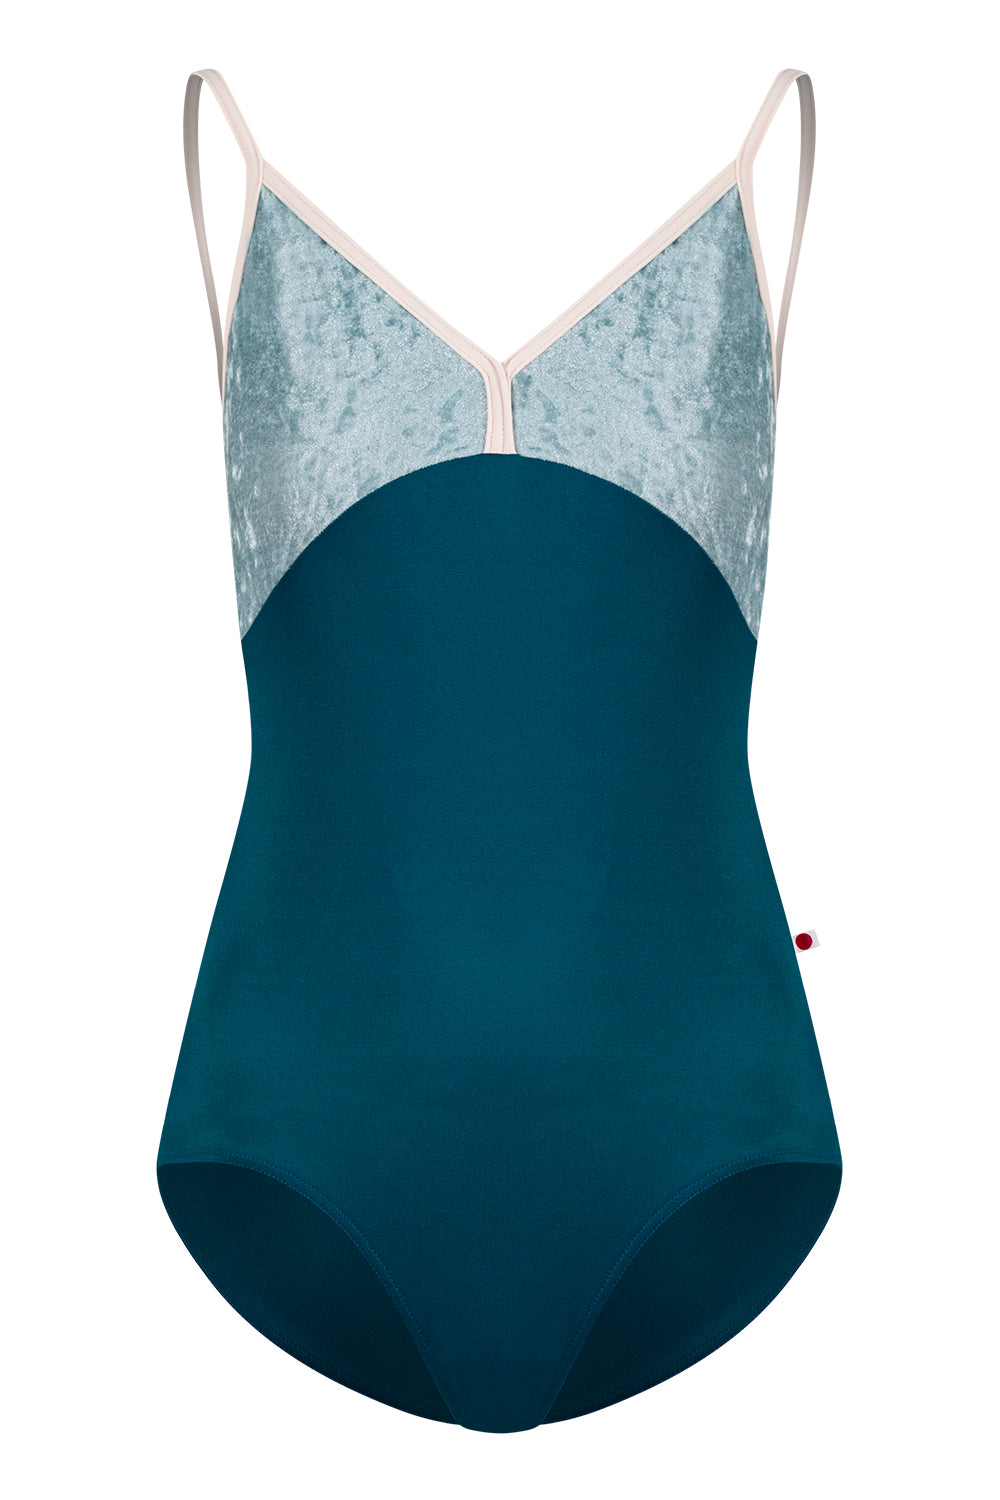 Daria leotard in N-Ottanio body color with CV-Icea top color and T-Misty Rose trim color